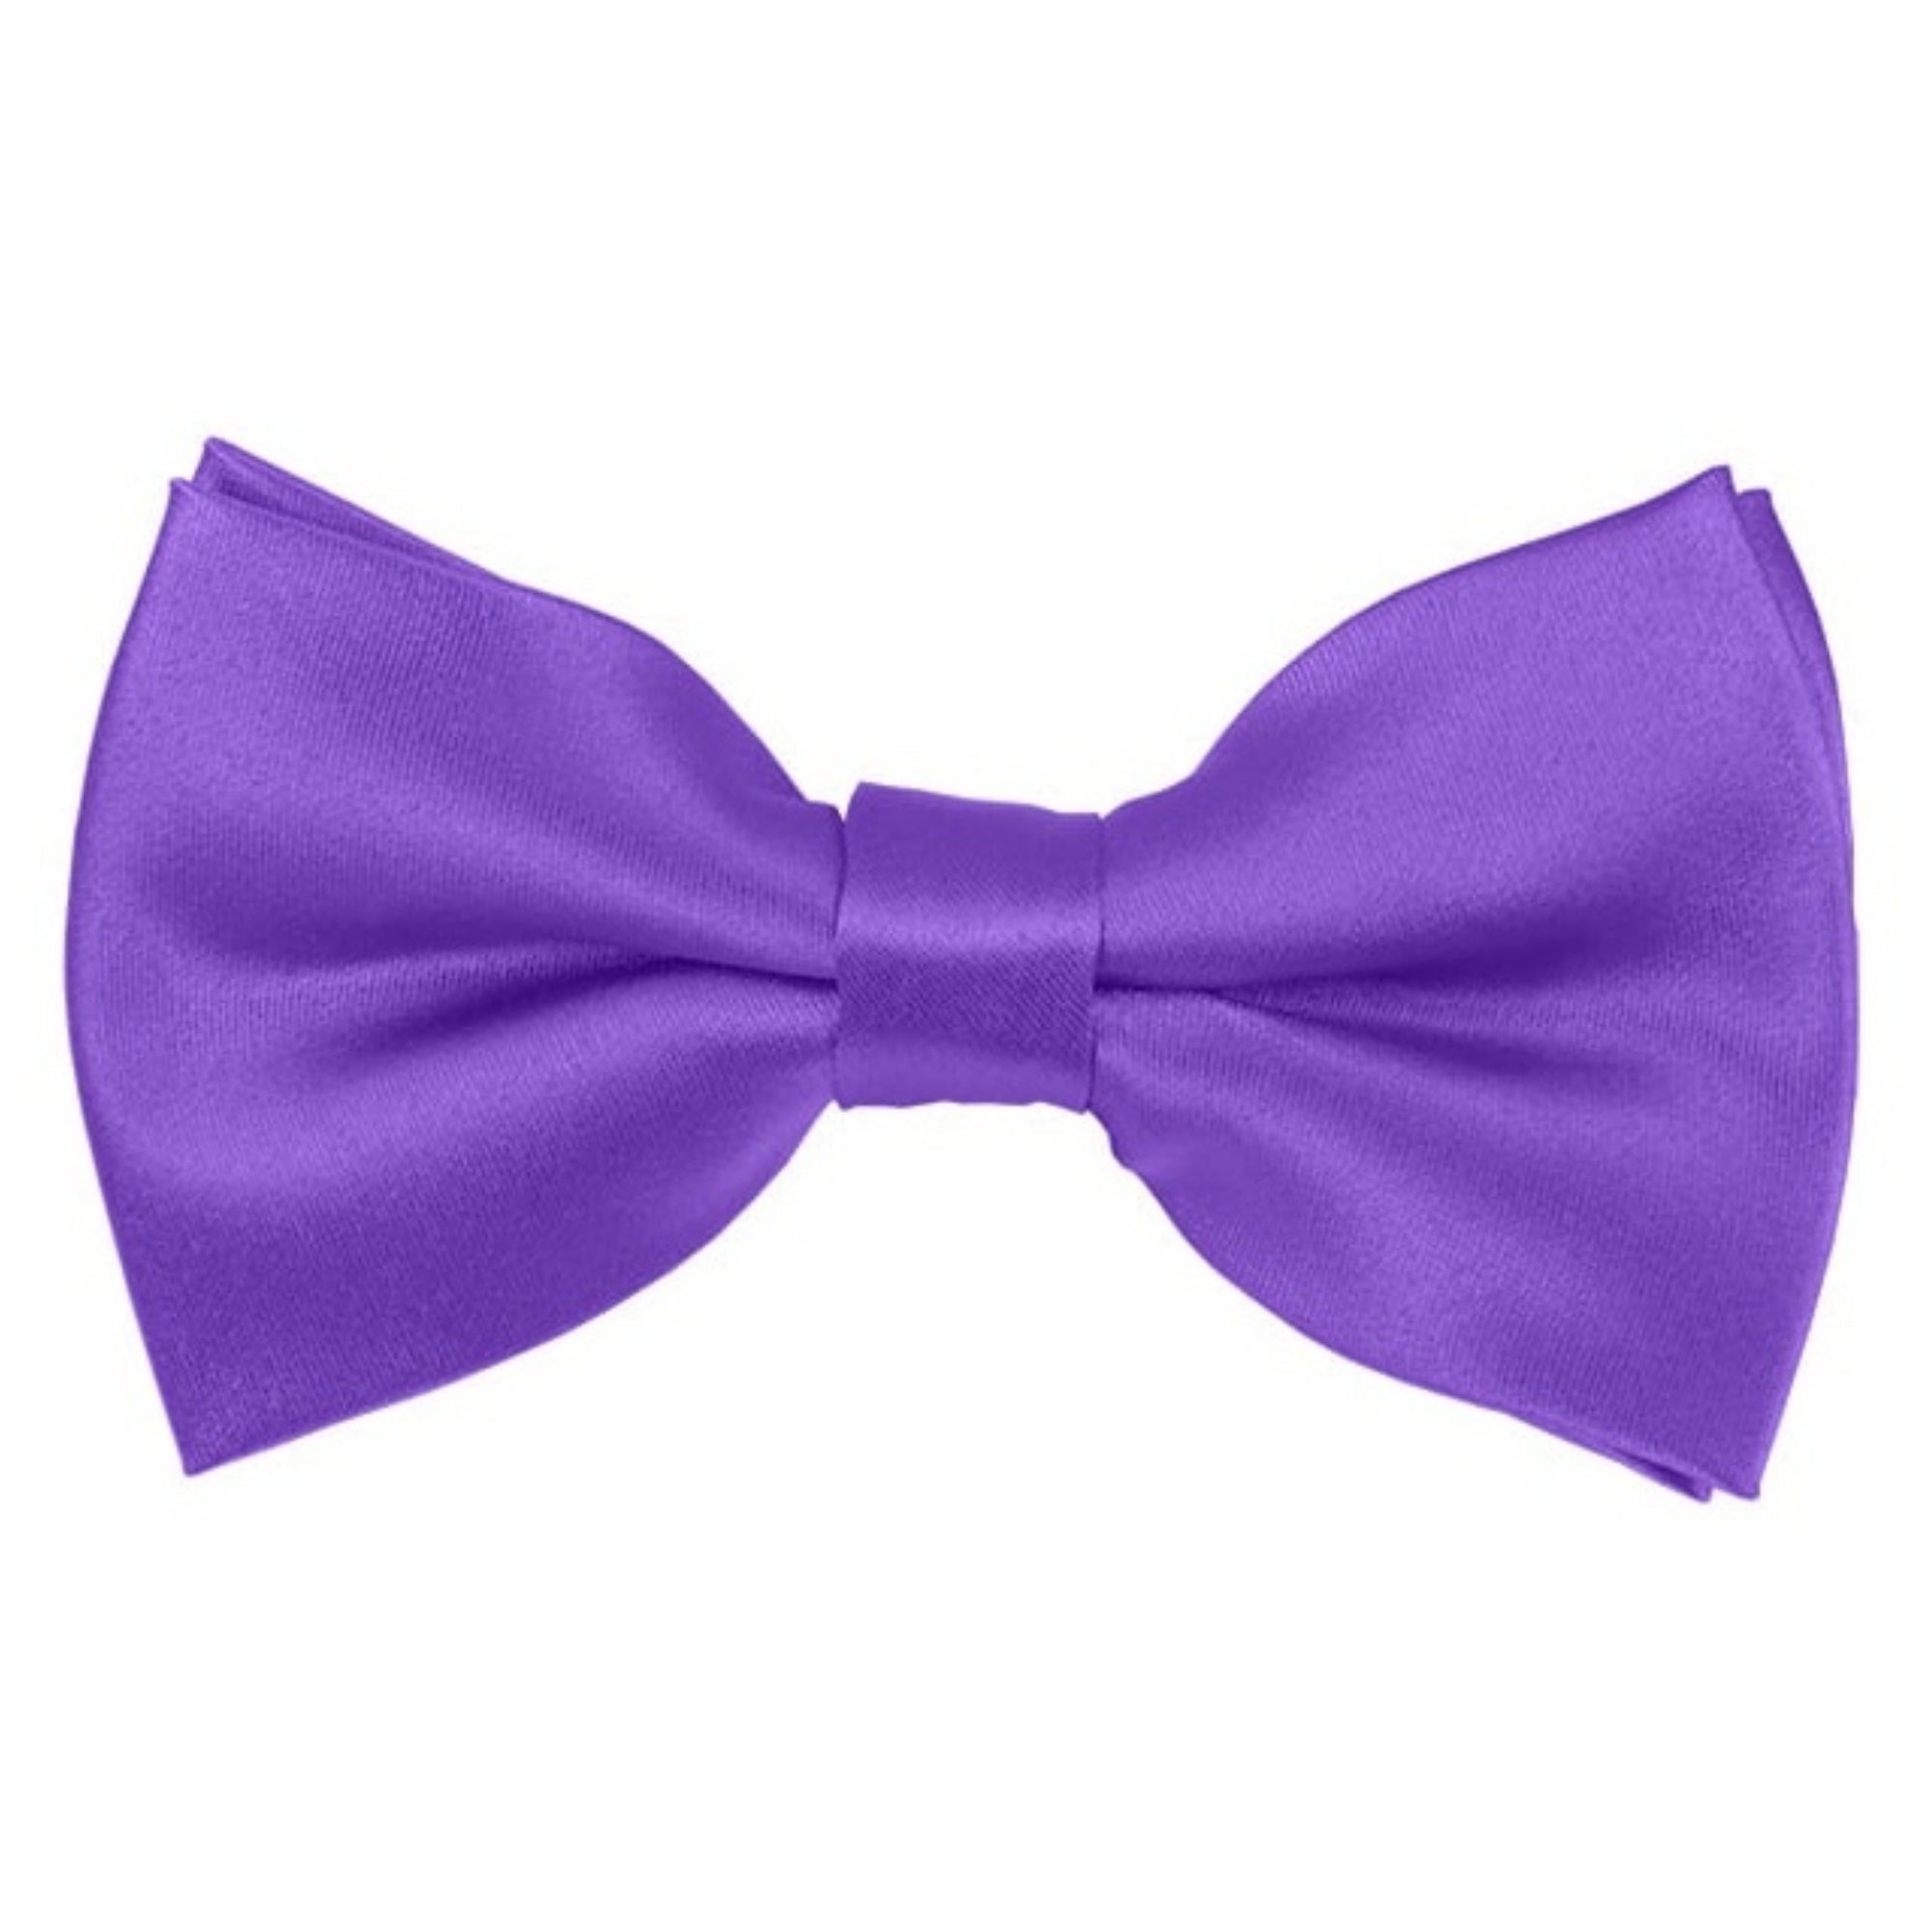 TheDapperTie Men's Solid Color 2.5 W And 4.5 L Inch Pre-Tied adjustable Bow Ties Men's Solid Color Bow Tie TheDapperTie Purple  